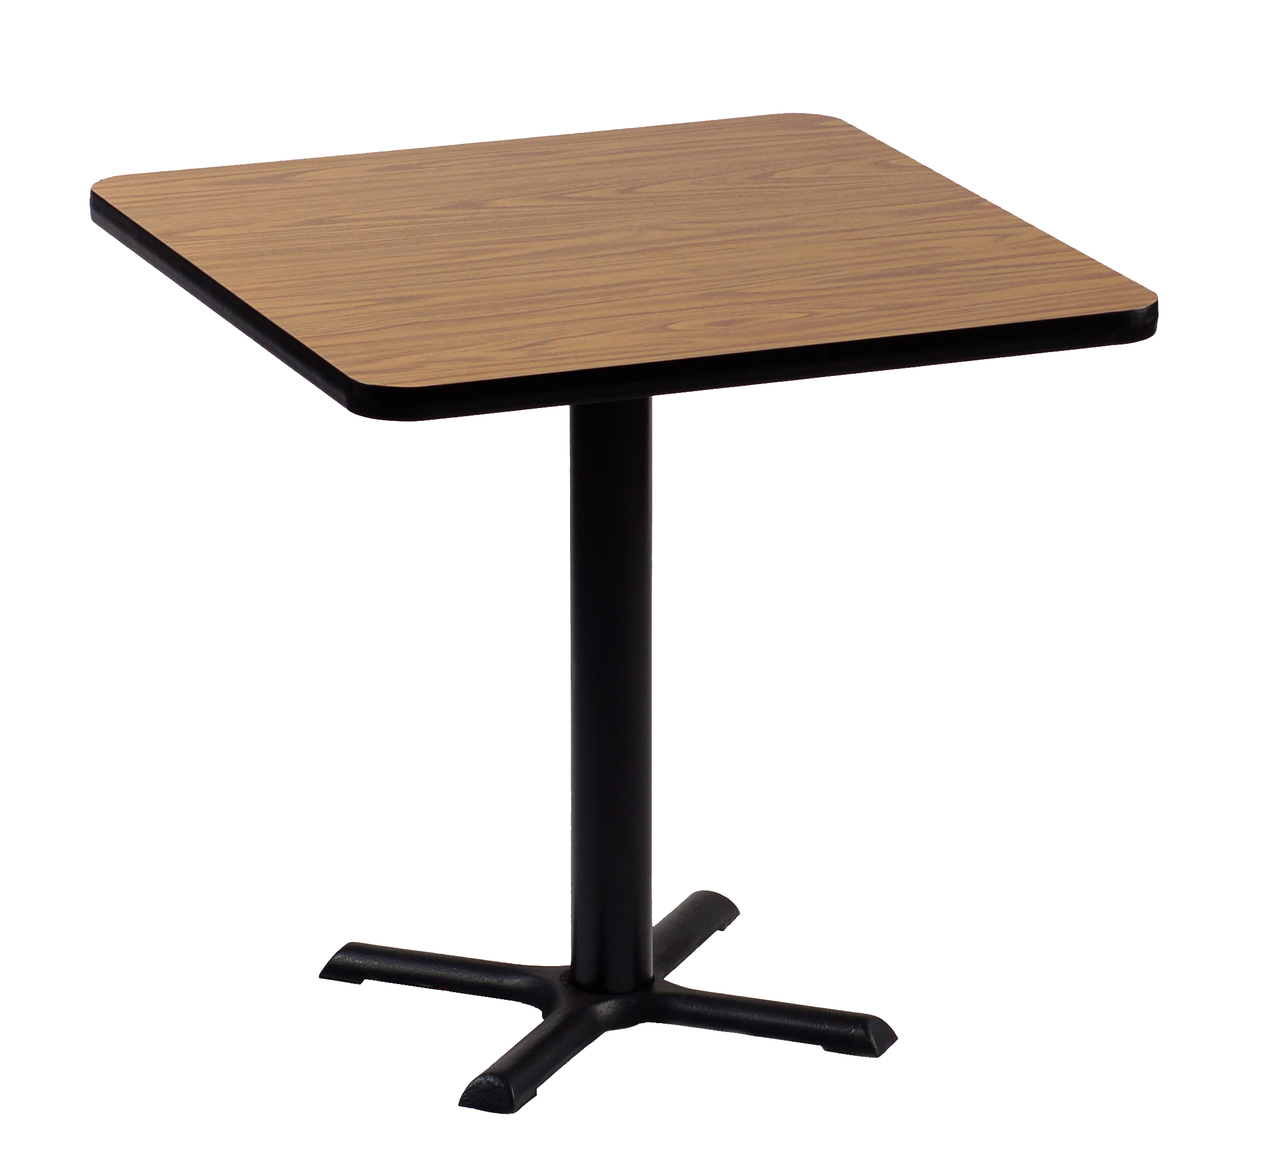 FurnitureÿCorrell Bxt36S 01 Cafe and Breakroom Tables Square Walnut